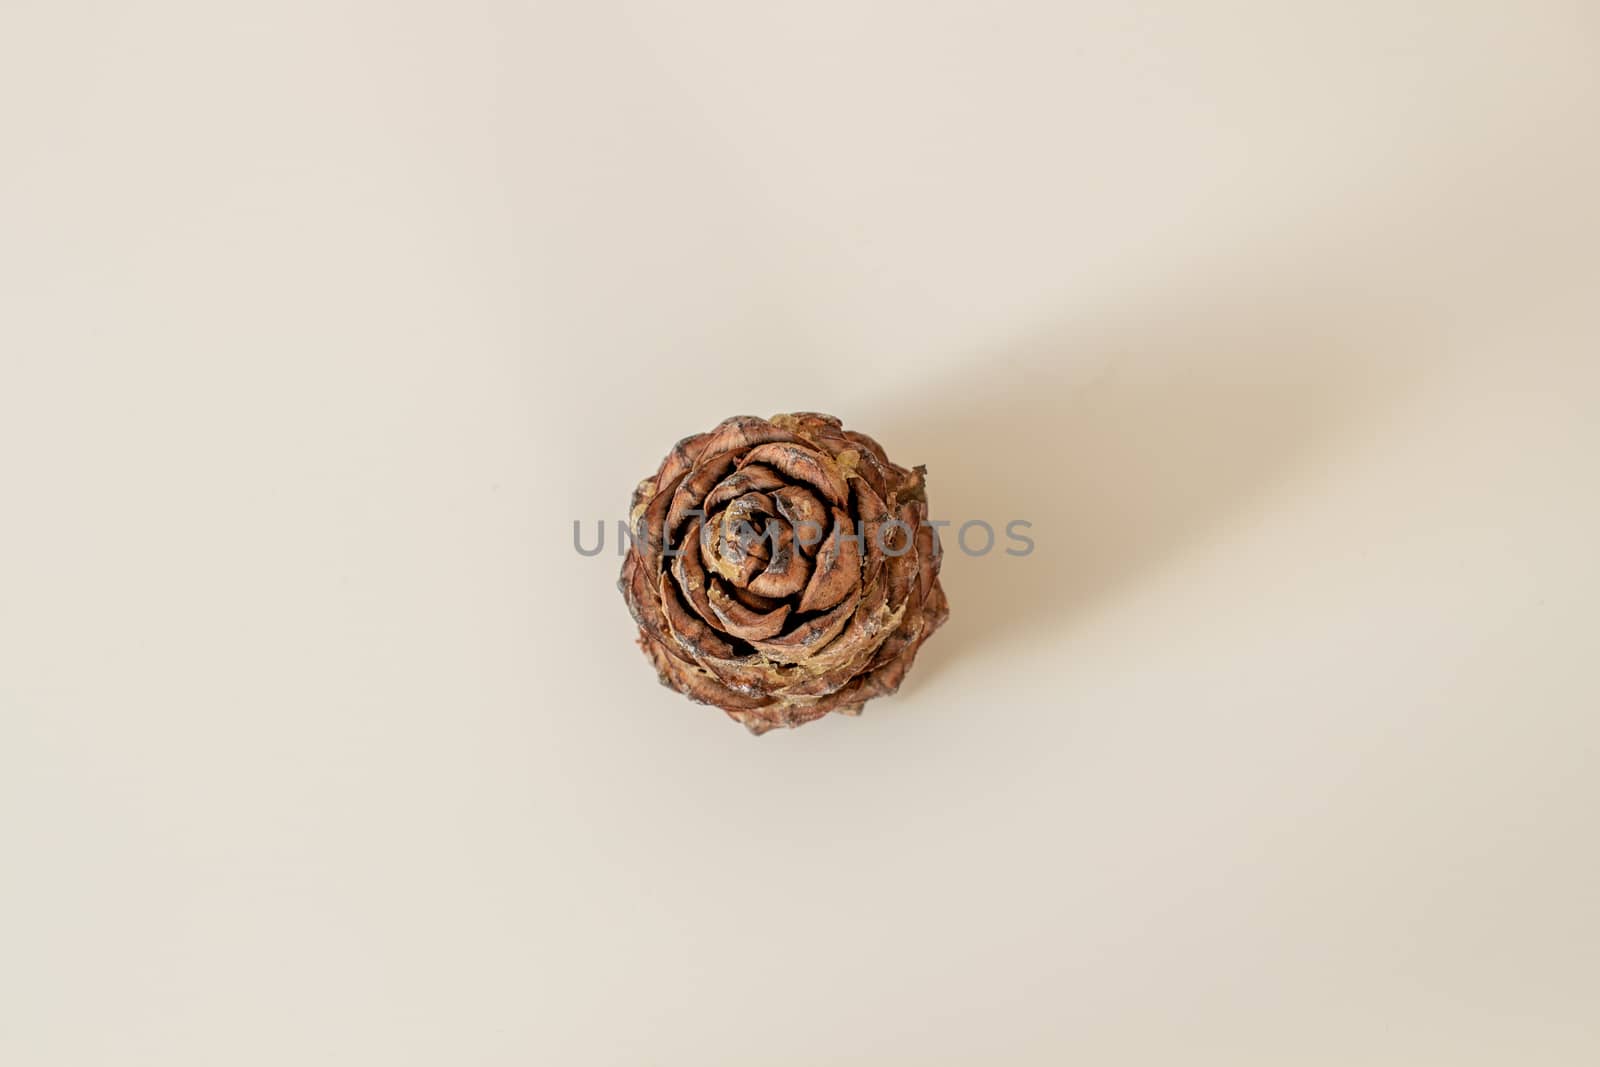 Pine cone with nuts on a white background by AnatoliiFoto